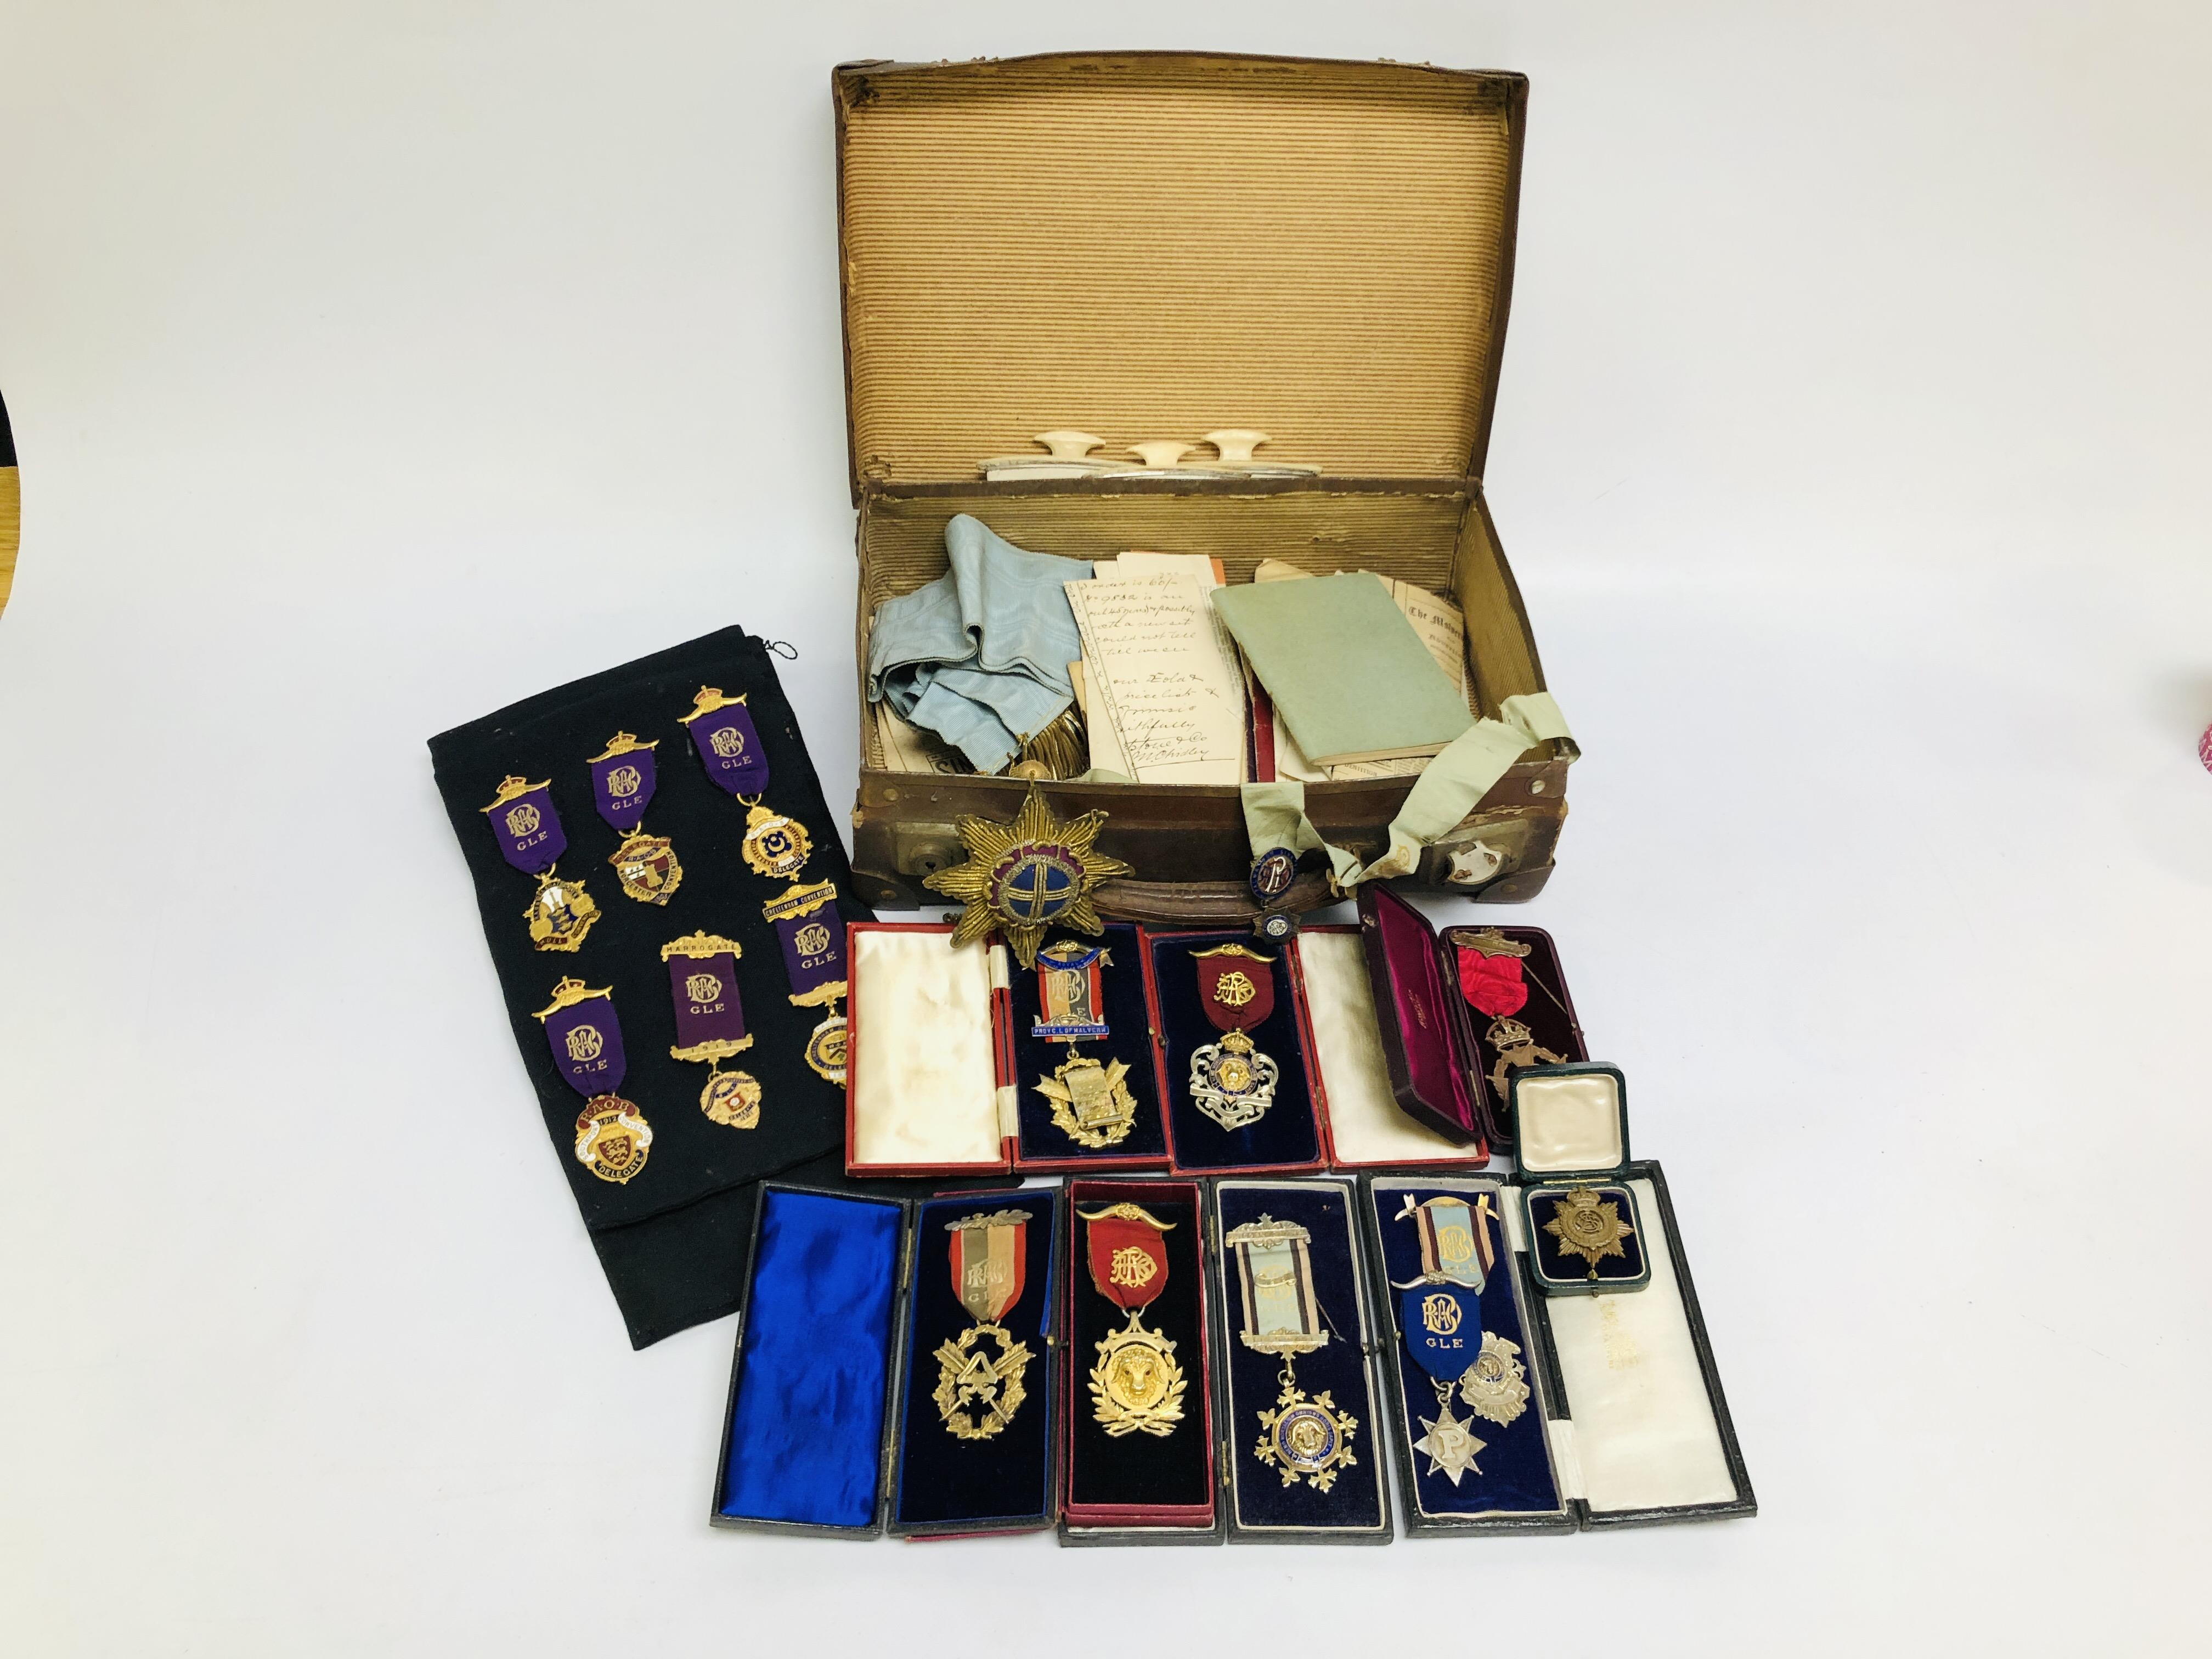 A VINTAGE CASE CONTAINING A COLLECTION OF MASONIC REGALIA TO INCLUDE SASHES, MEDALS, PAPERWORK,